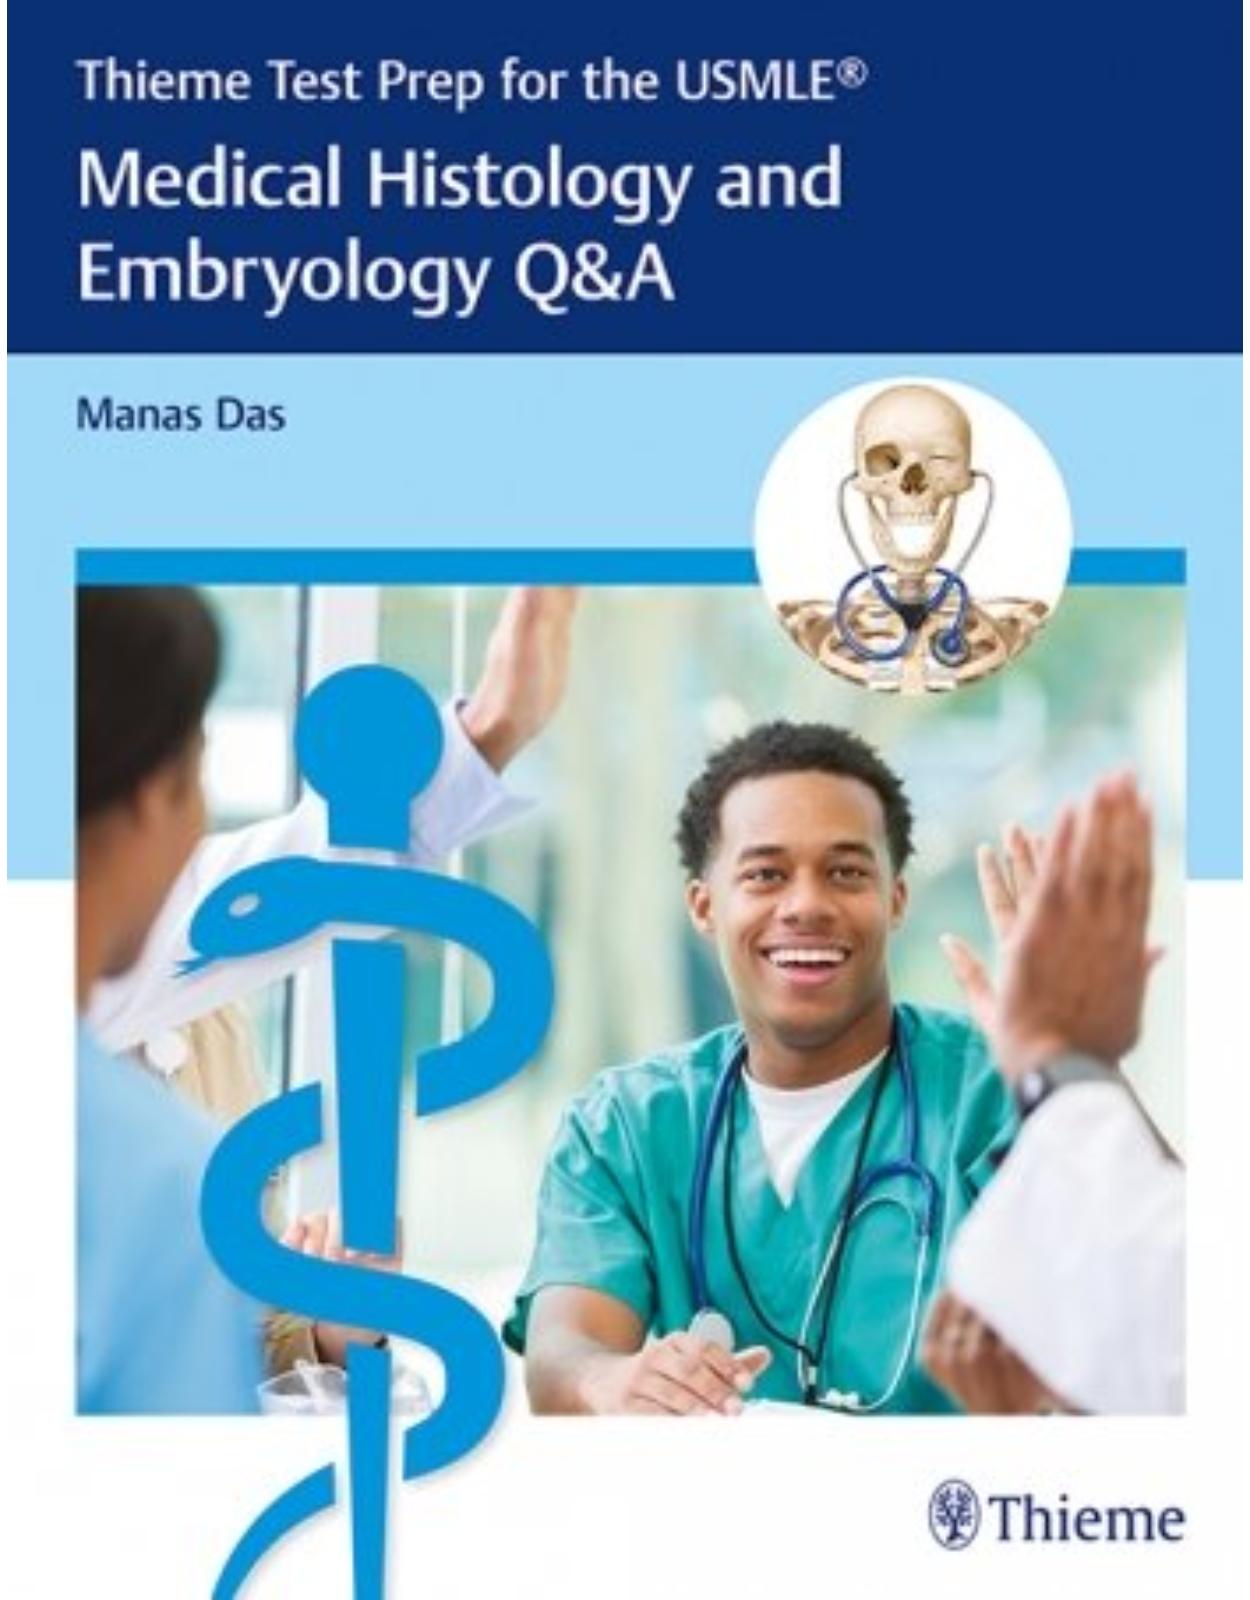 Thieme Test Prep for the USMLE: Medical Histology and Embryology Q&A 